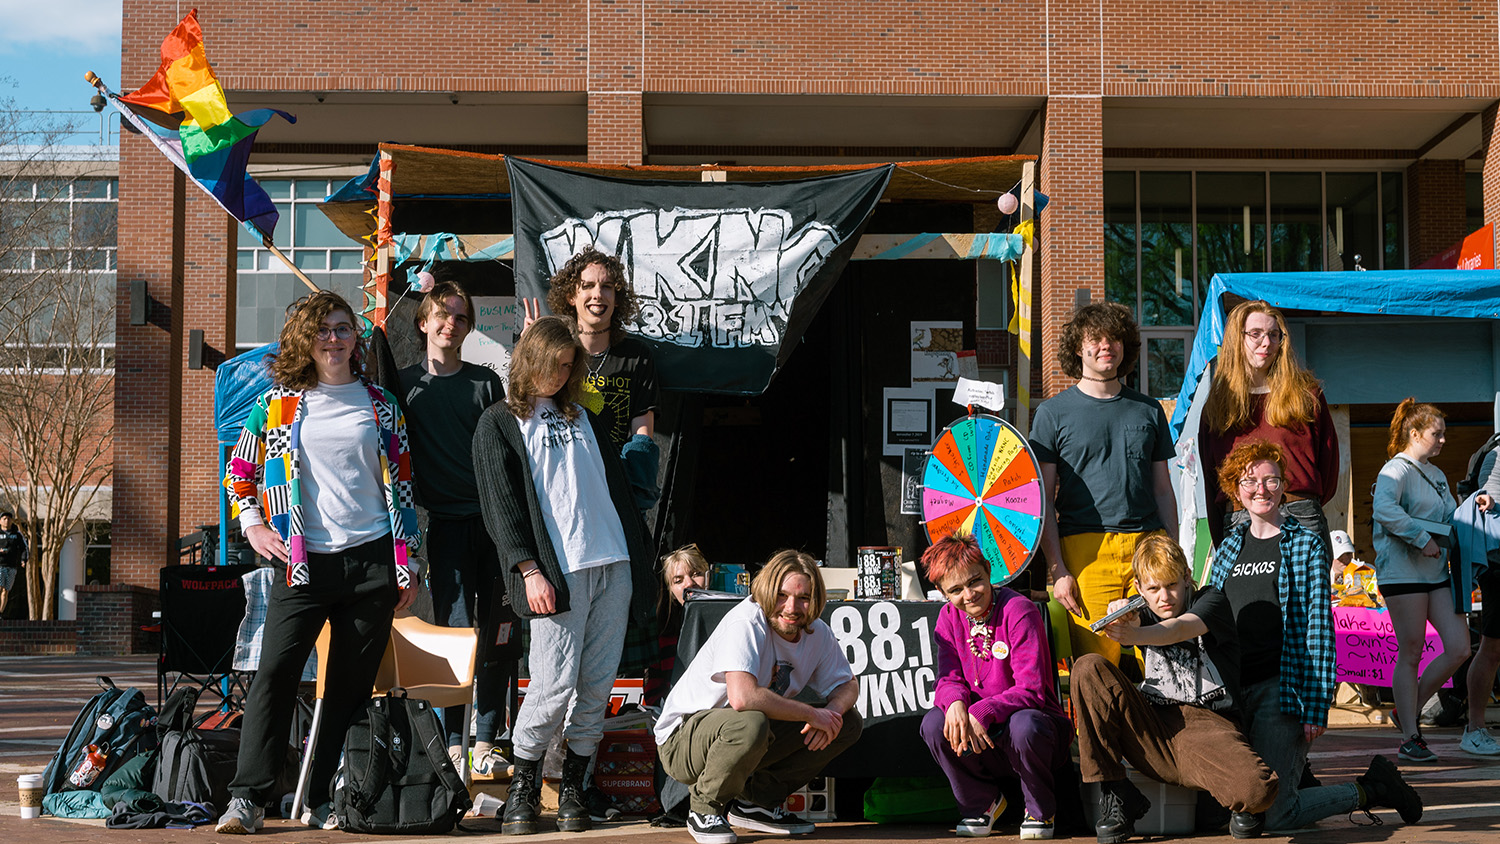 A group of students sit in front of a wooden structure with a black and white flag that reads "WKNC"